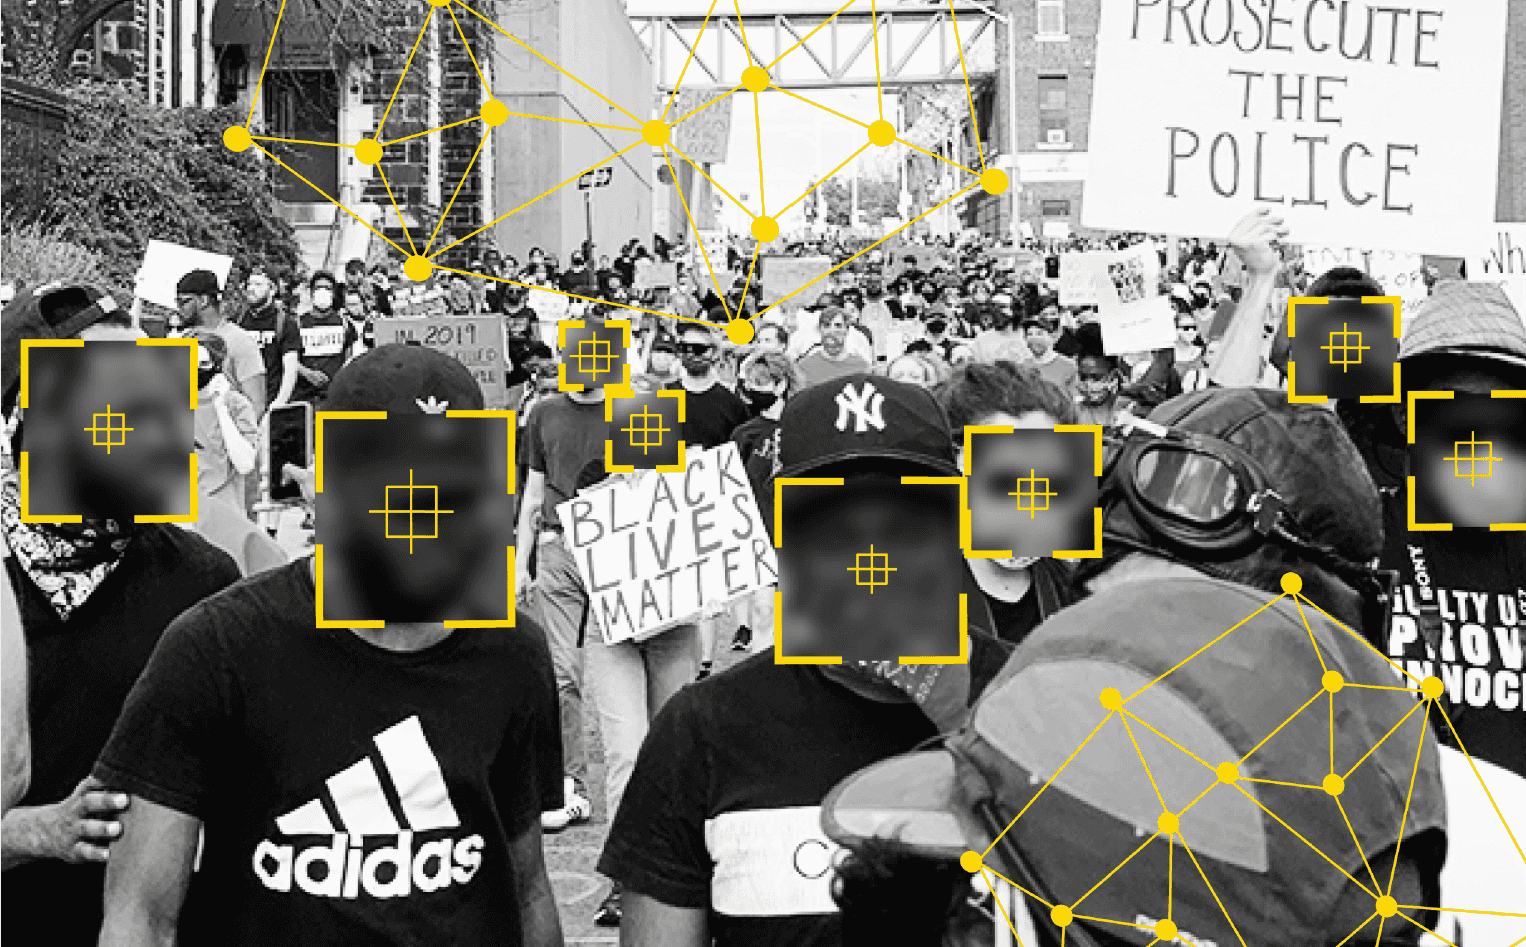 What Do You Know About Facial Recognition Technology? A Screening of CODED BIAS